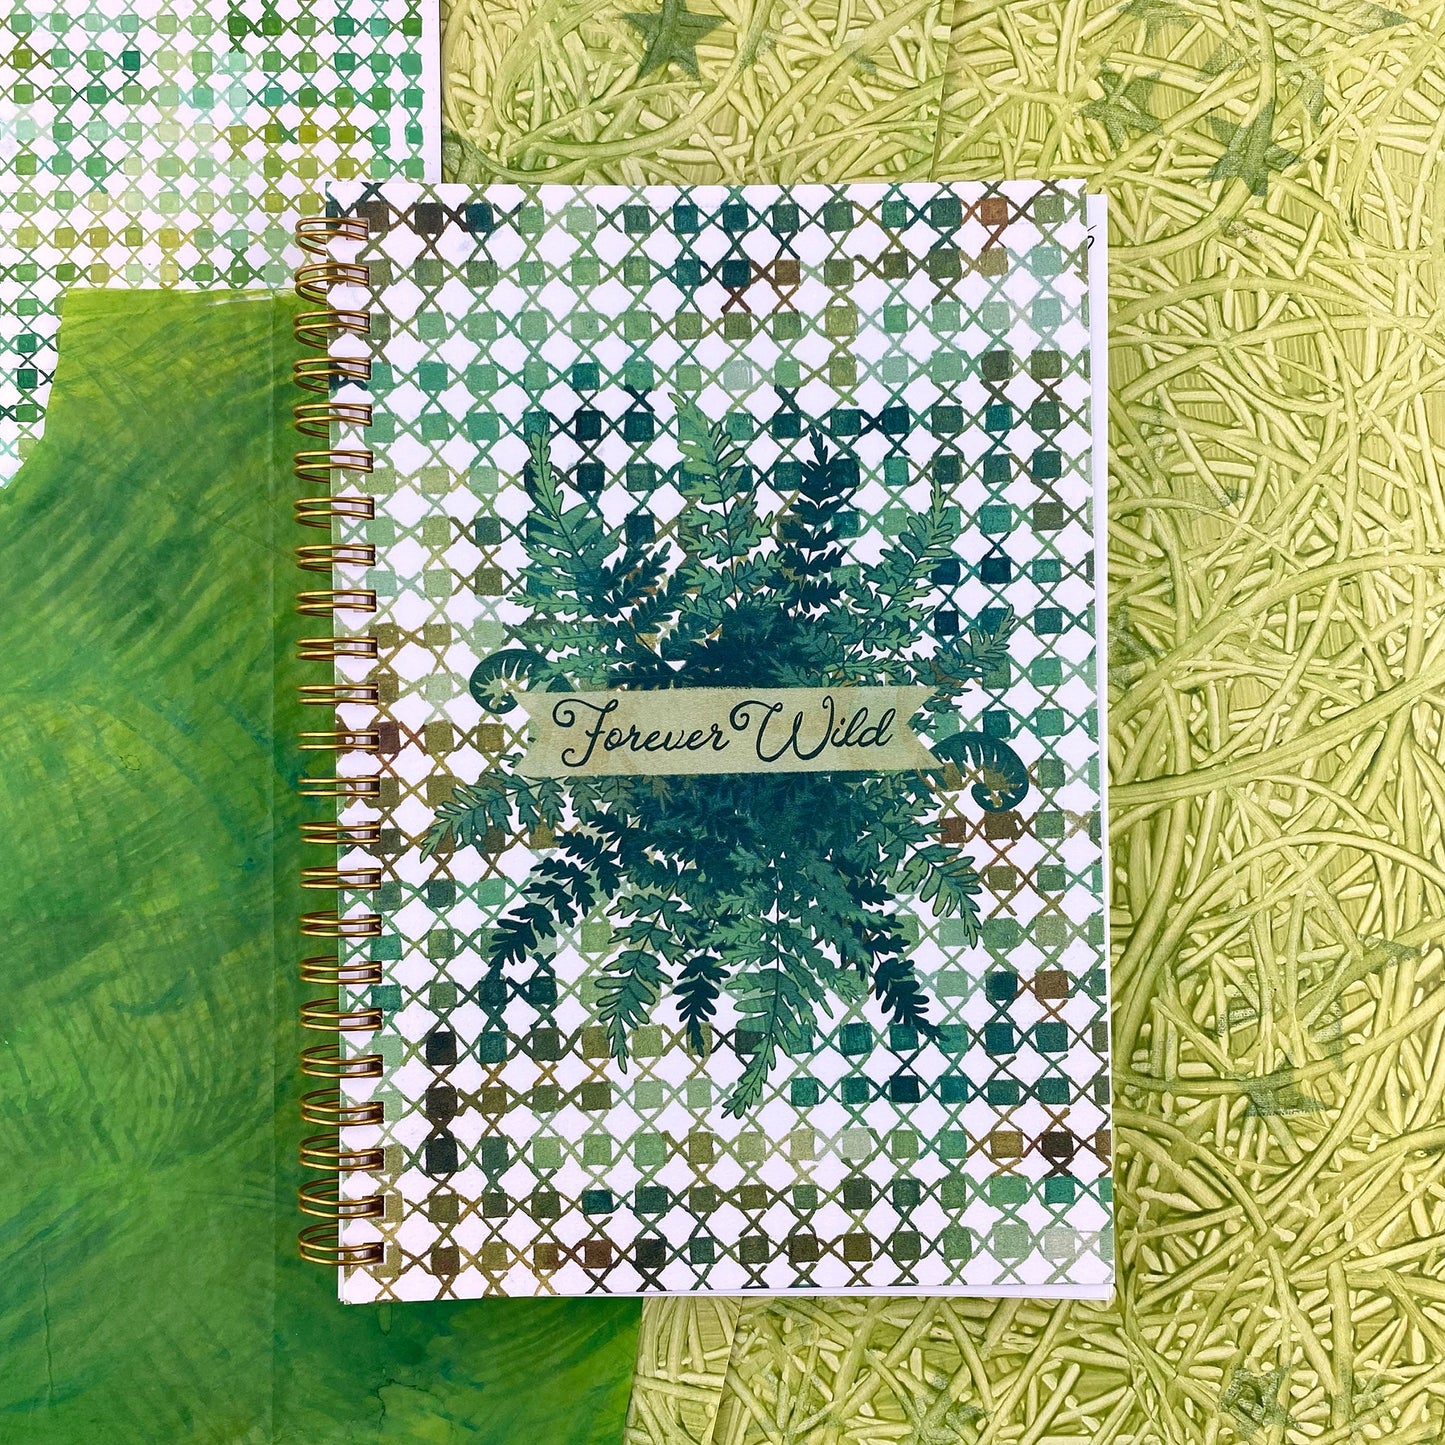 Spiral Bound notebook with a handpainted checkered cover , a grouping of ferns in the center with a banner that says Forever Wild in a hand drawn script font. Very outdoorsy. Using all the green colors. 